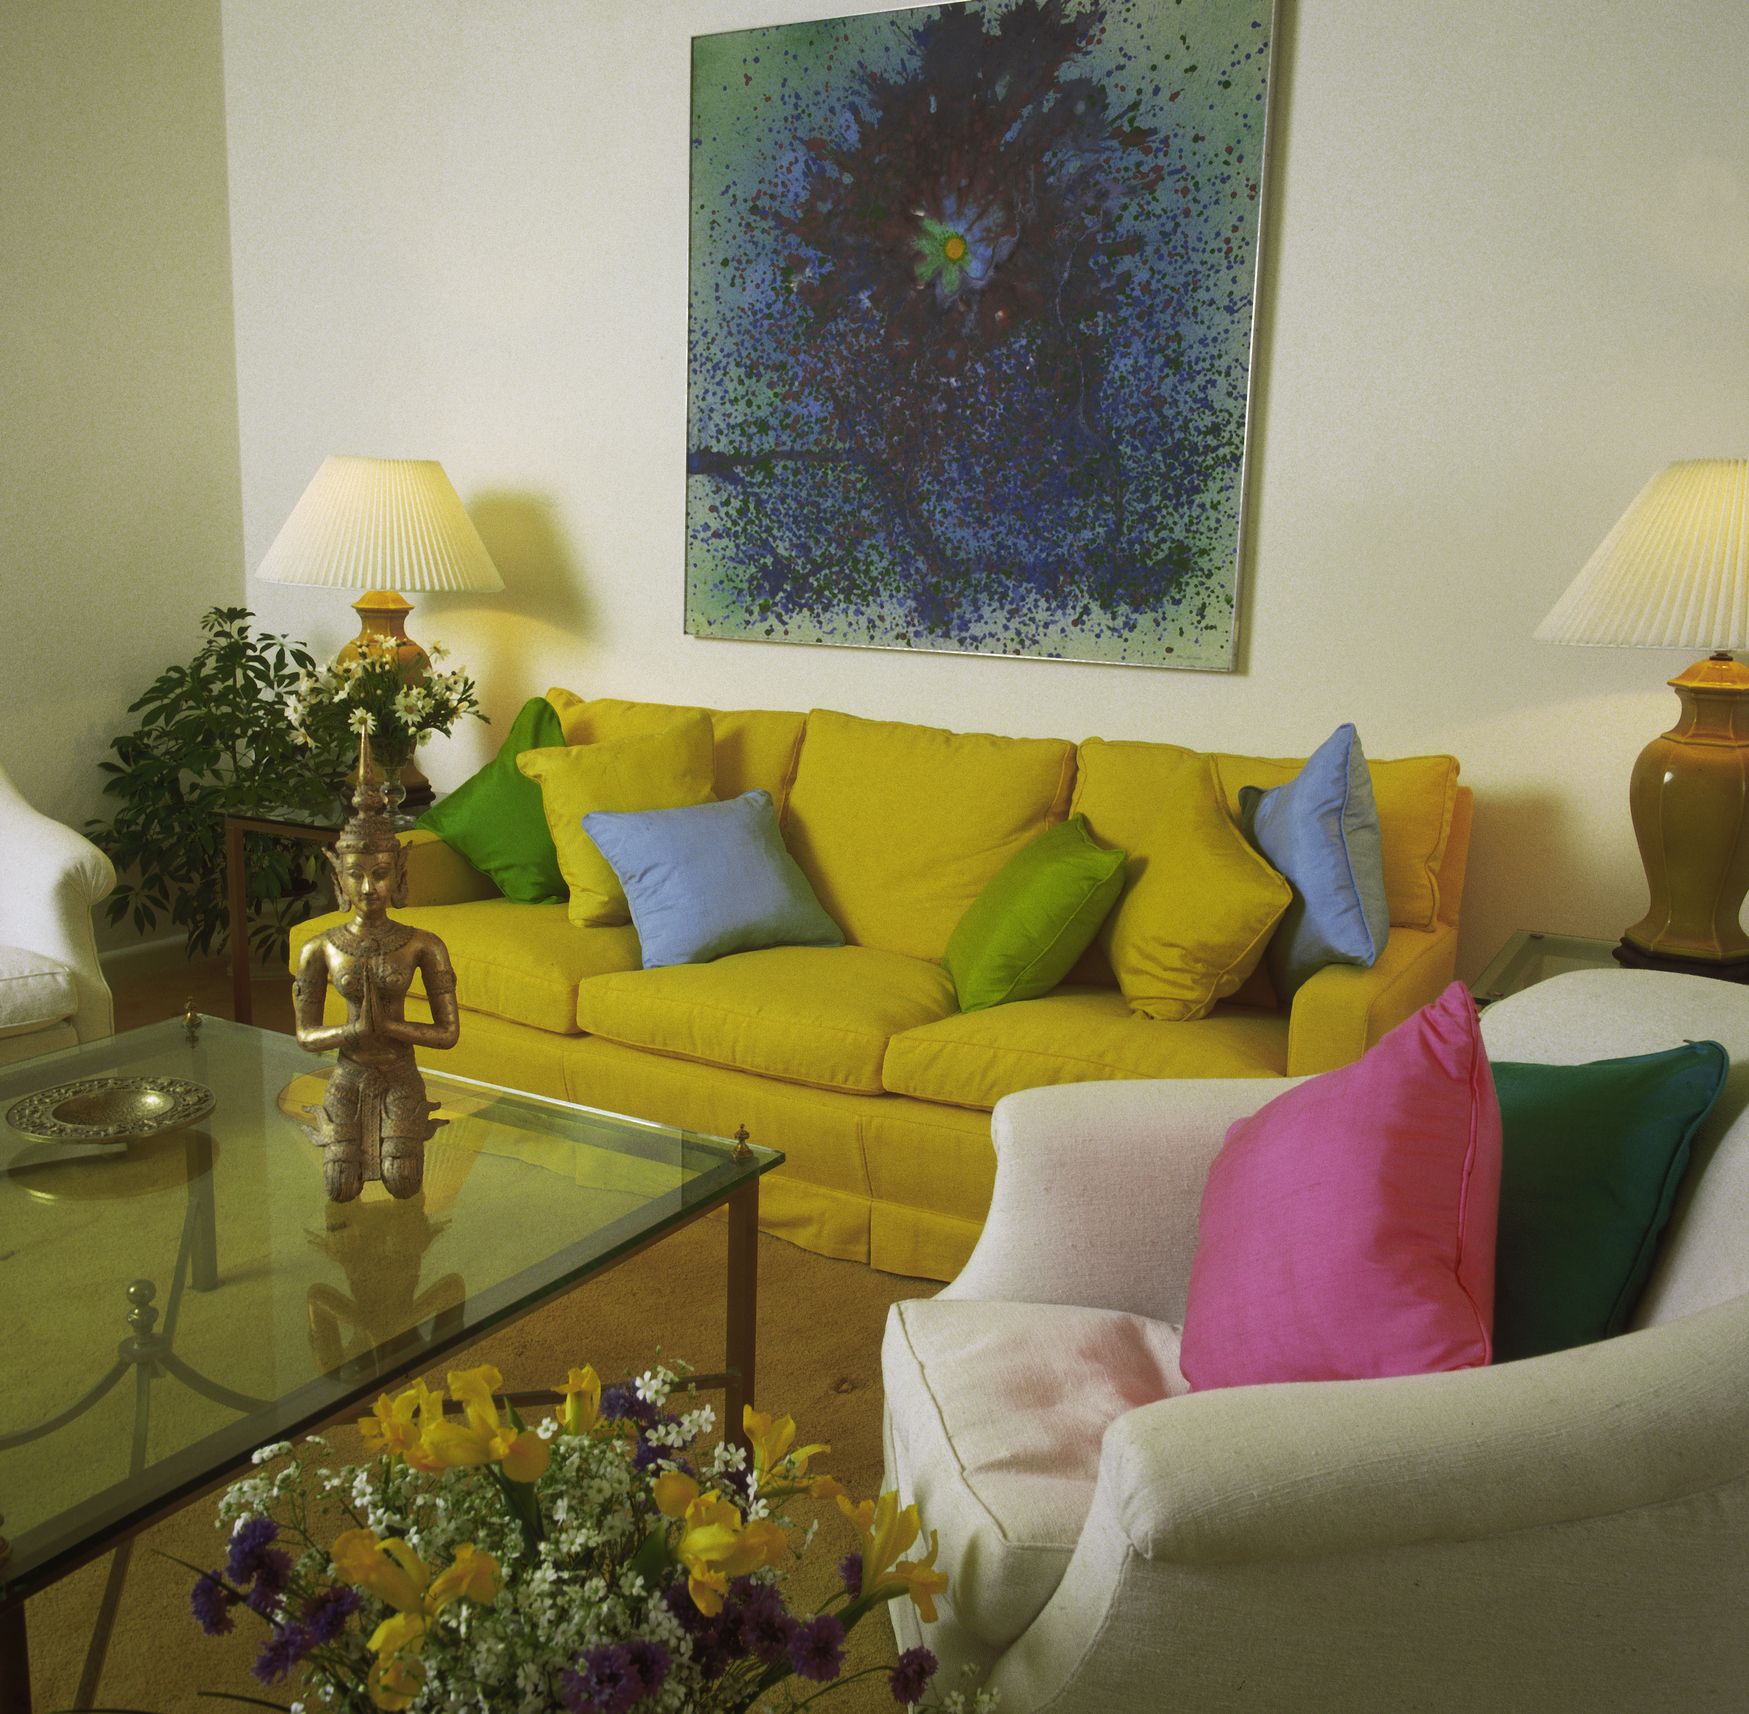 12 Decor Trends From The 1990s That You Didn\'t Know You Missed